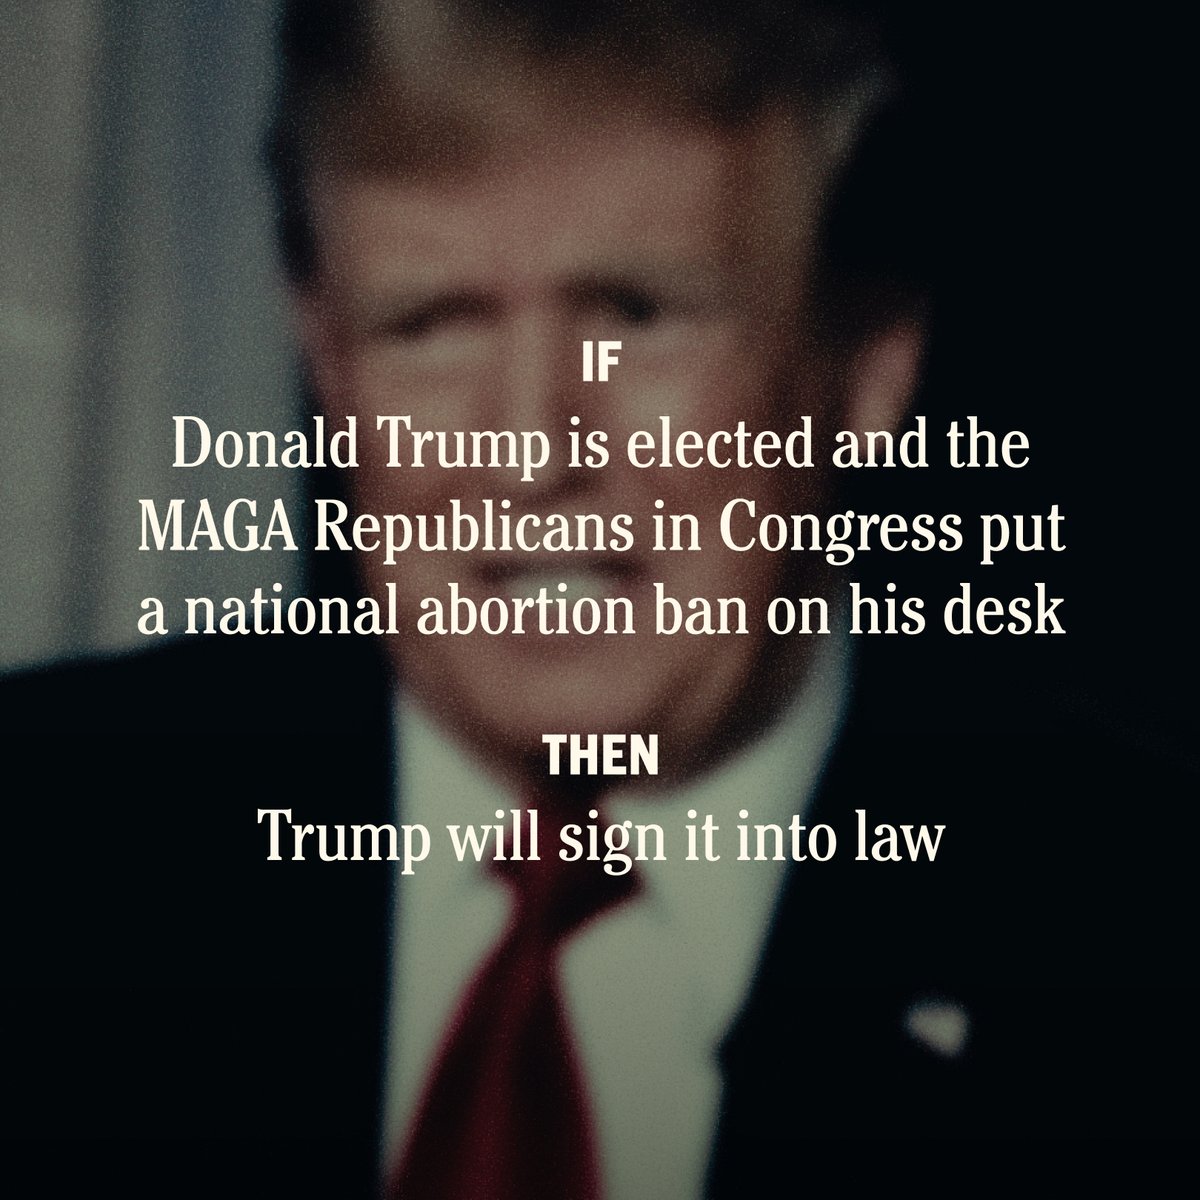 Donald Trump overturned Roe v. Wade. Because of him, 1 in 3 women in America already live under dangerous abortion bans that put their lives at risk and threaten doctors with prosecution. It will only get worse if he is elected.